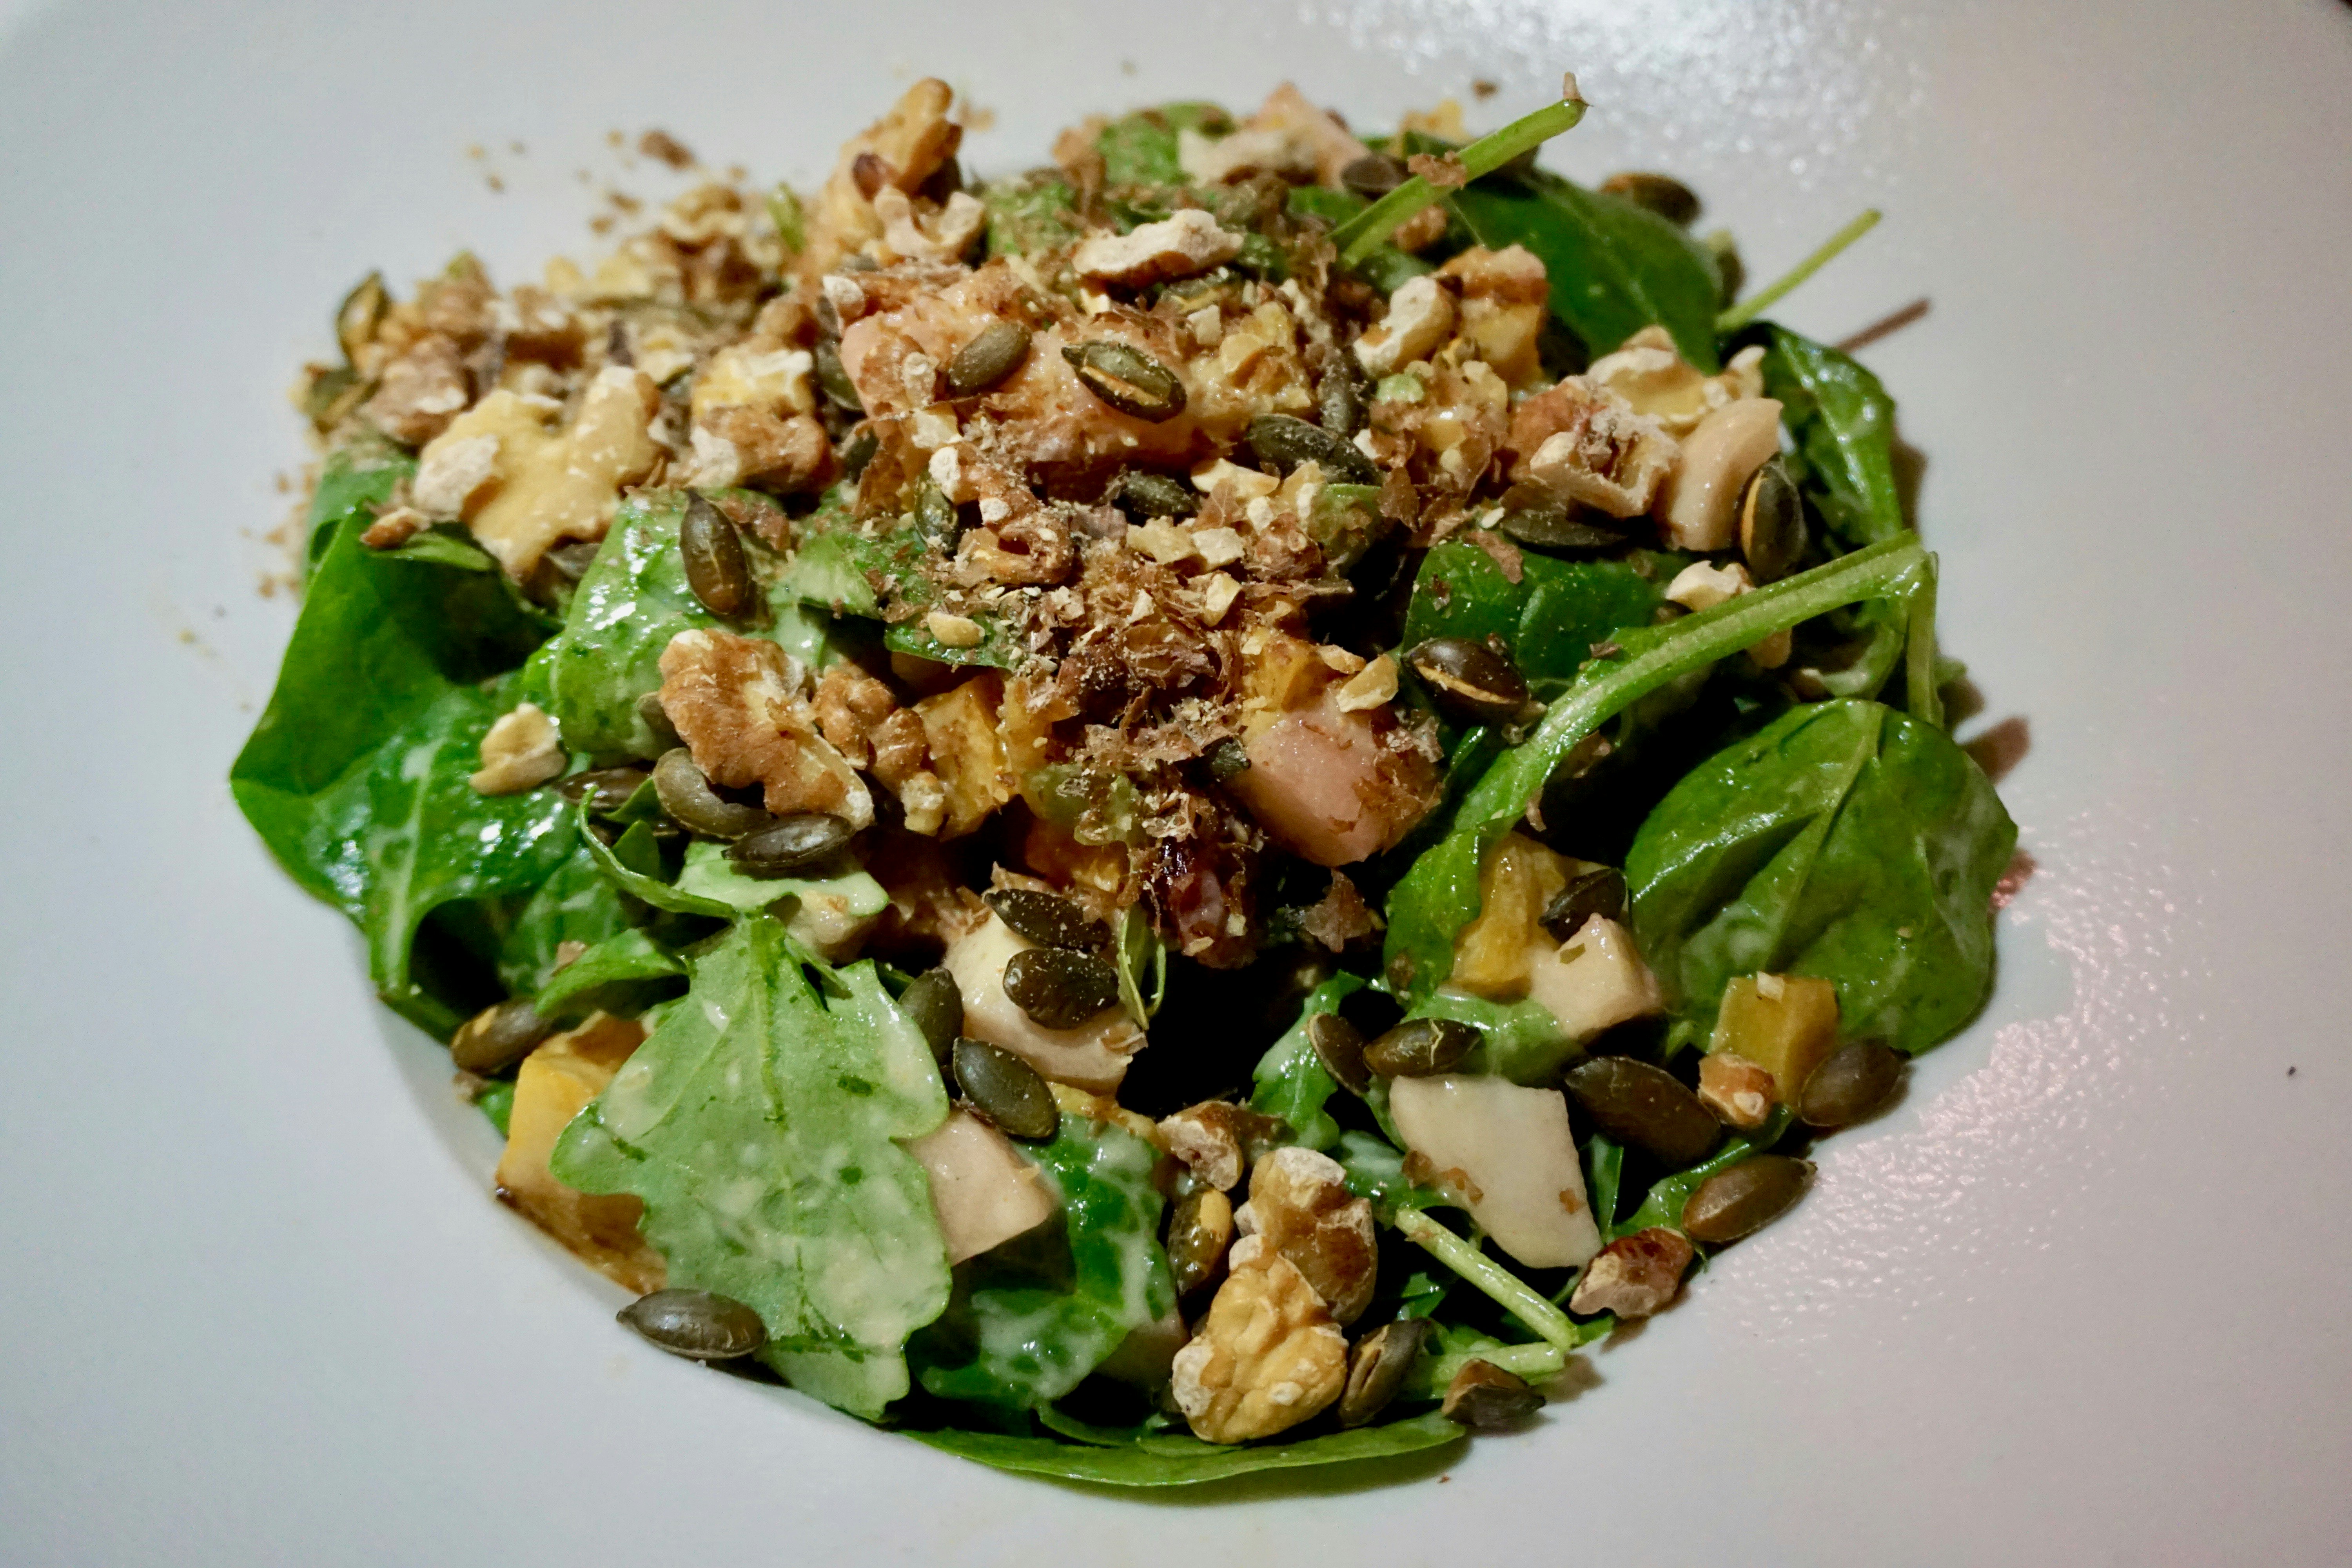 Salad ingerdients including lettuce leaves, sunflower seeds and walnuts have been artfully arranged on a white plate.